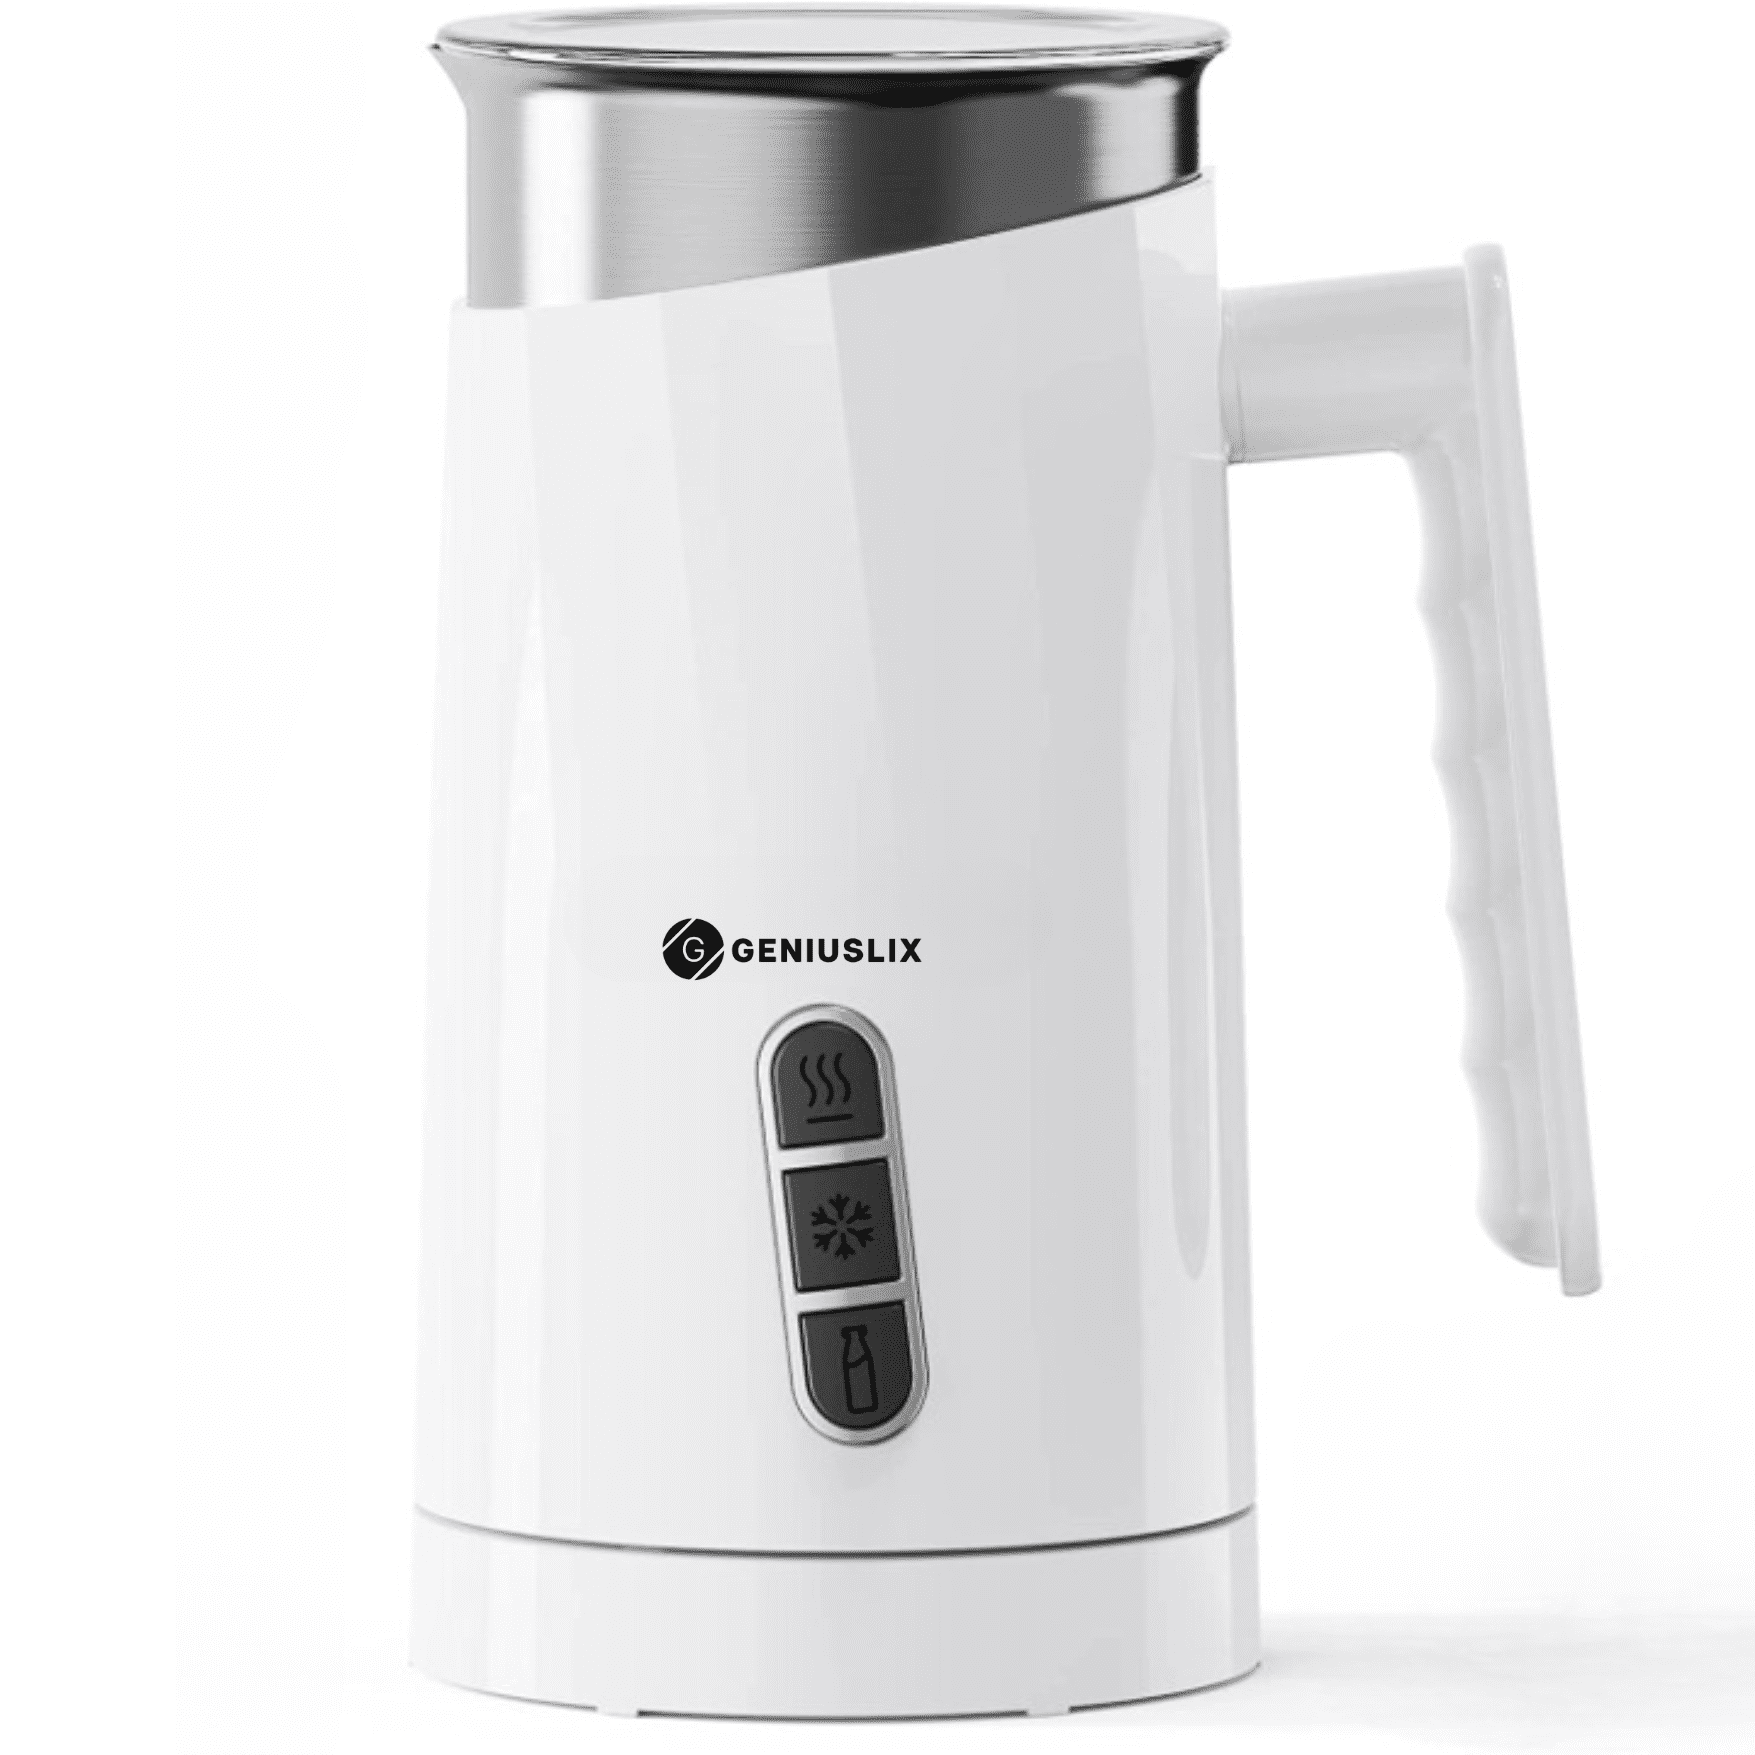 Geniuslix Milk Steamer and Frother 10.1 oz This Electric Milk Frother 500W Makes Soft Hot or Cold Foam Maker for Your Latte, Cappuccino and Macchiato